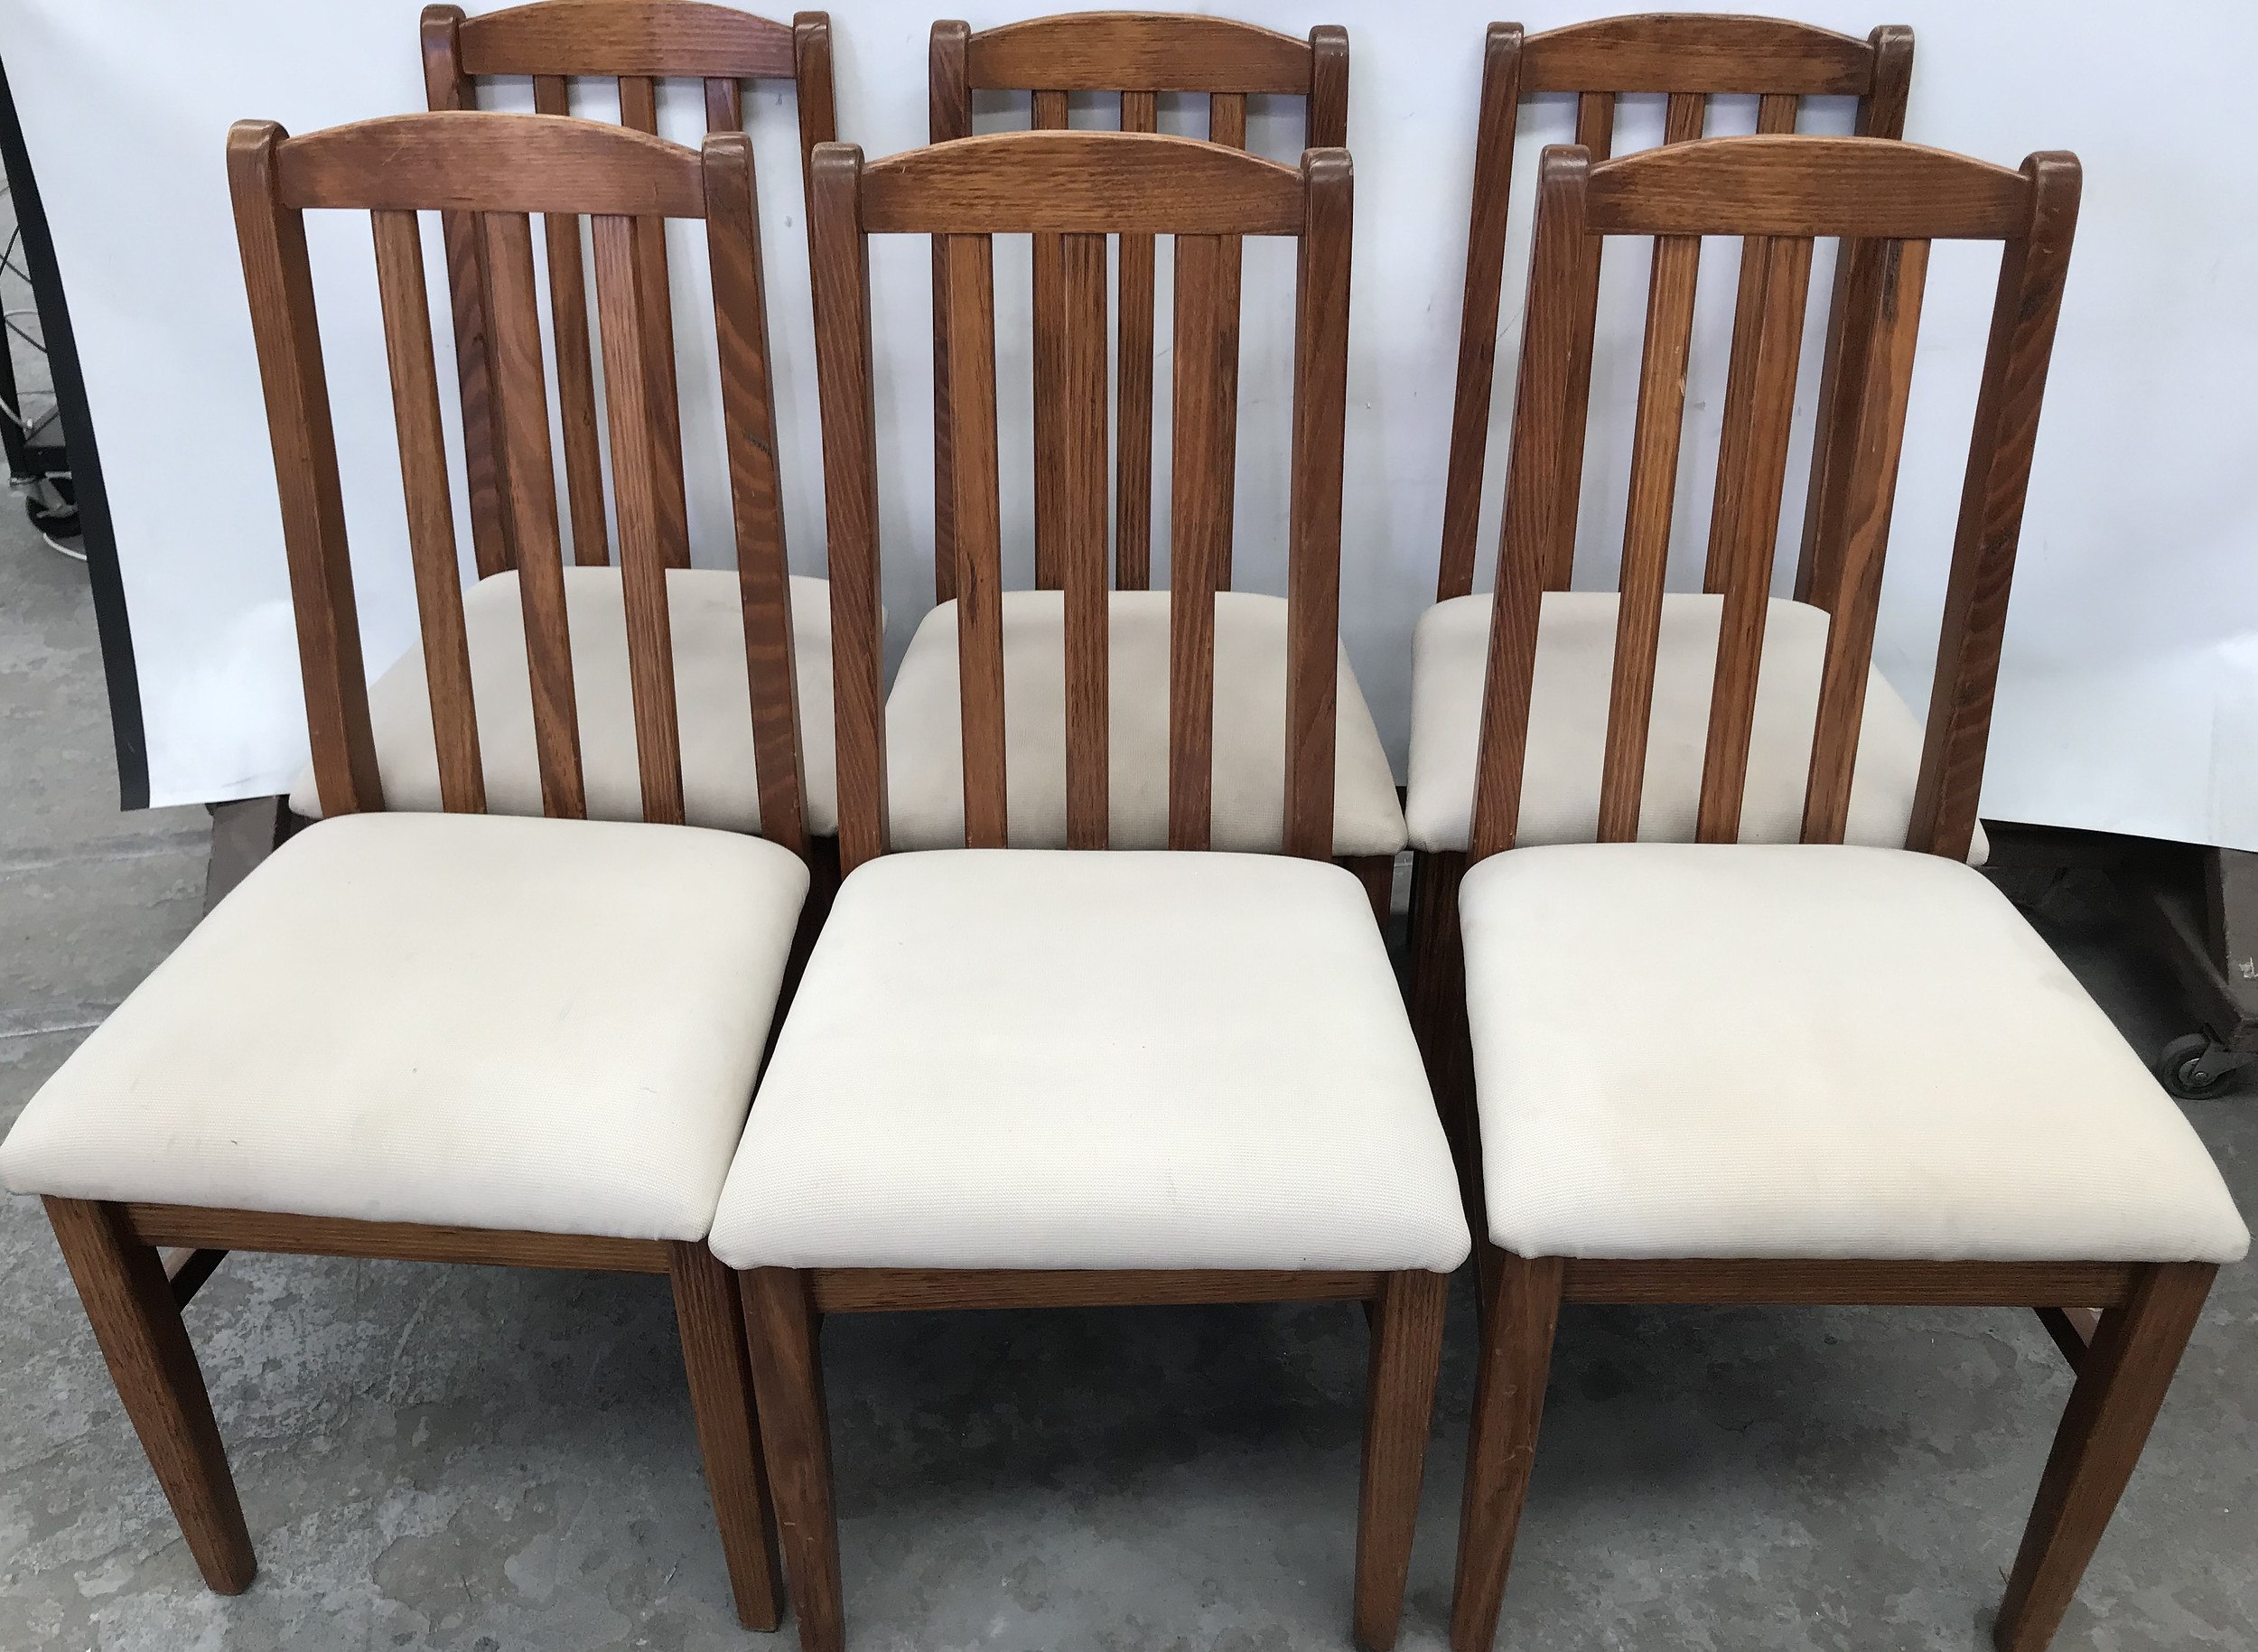 Walnut Color Dining Room Chair With Beige Cushion